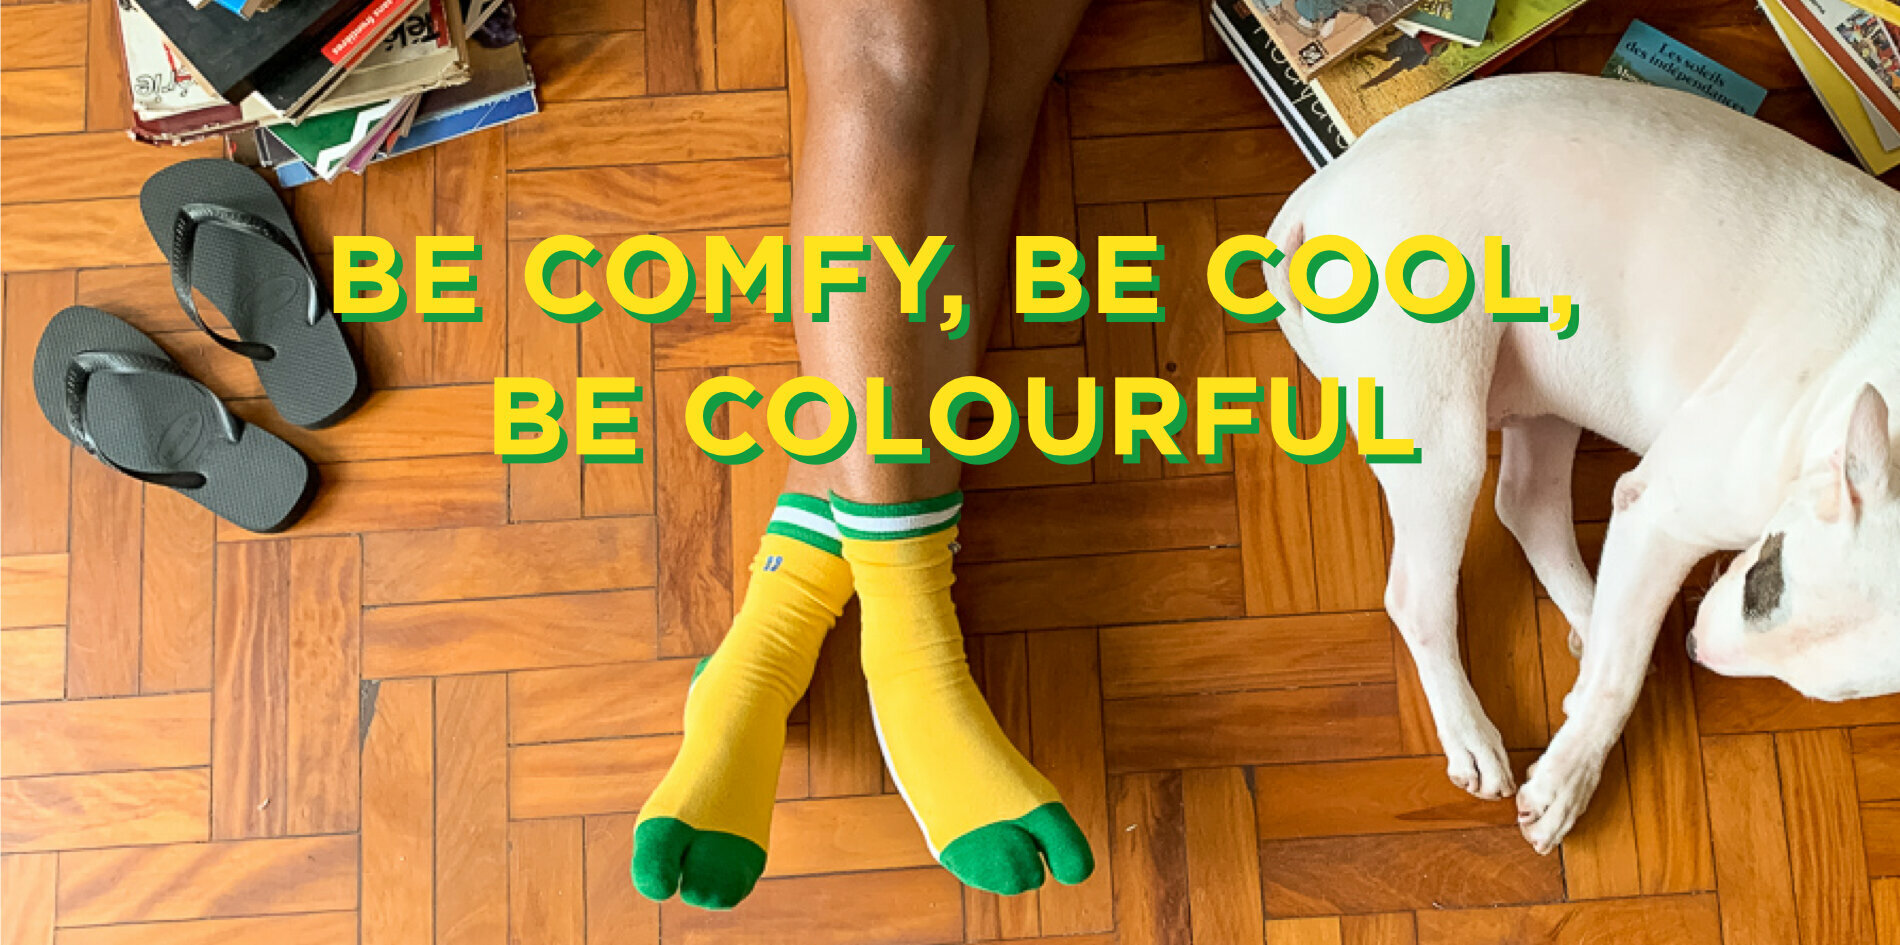 Be comfy, be cool,

be colourful